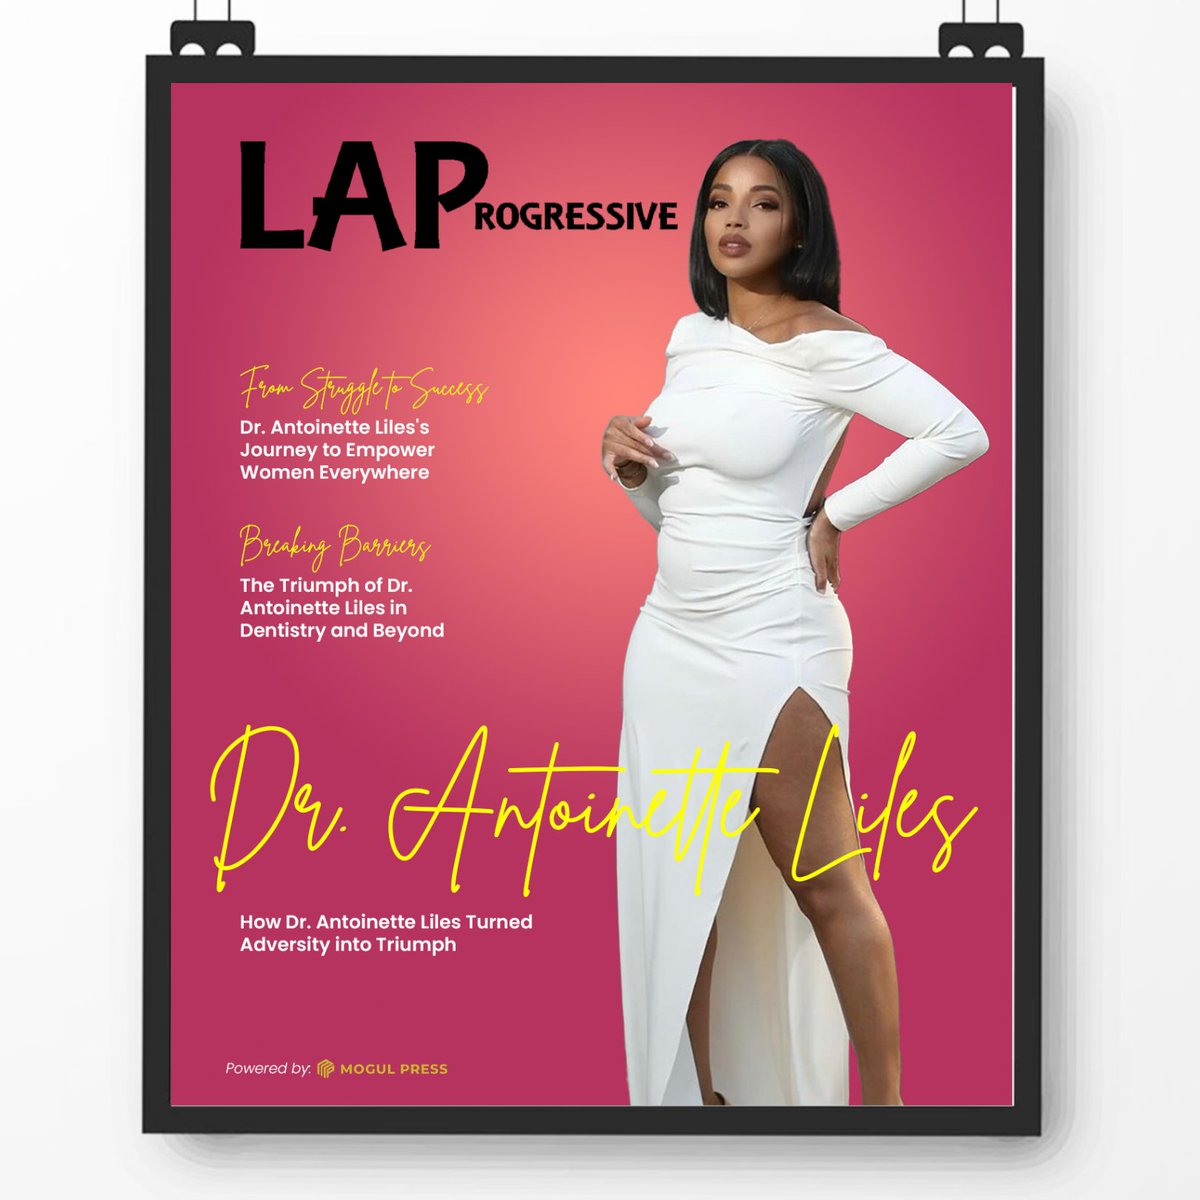 Dr. Antoinette Liles's path from overcoming hardship to success encourages women everywhere to never accept anything less.

#mogulpress #Drantoinette #inspirationaltale #clientdiaries #communityleader #inspiringwomen #prsuccessstories